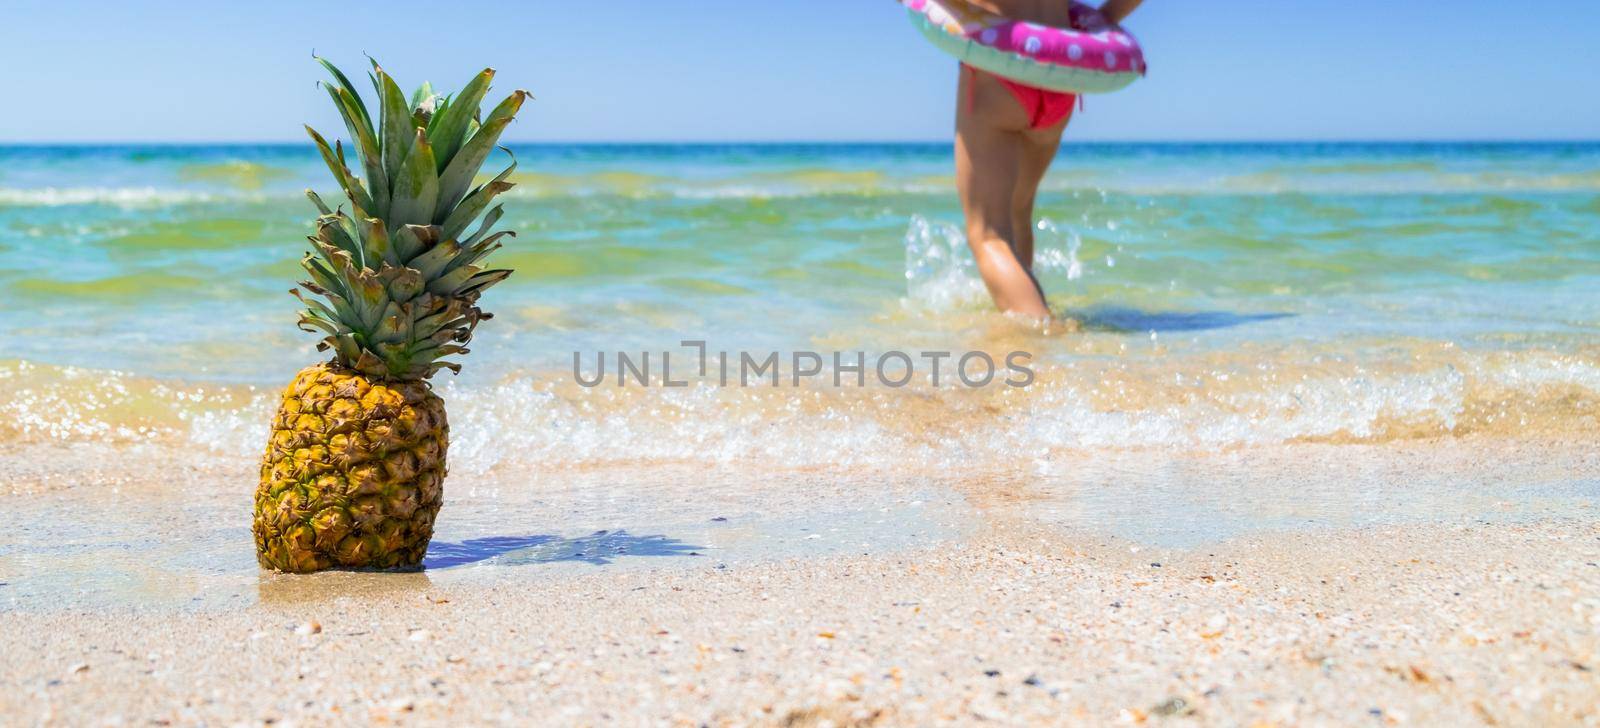 Pineapple on beach and kid running in the water background. Tropical background. Summer holiday concept. High quality photo